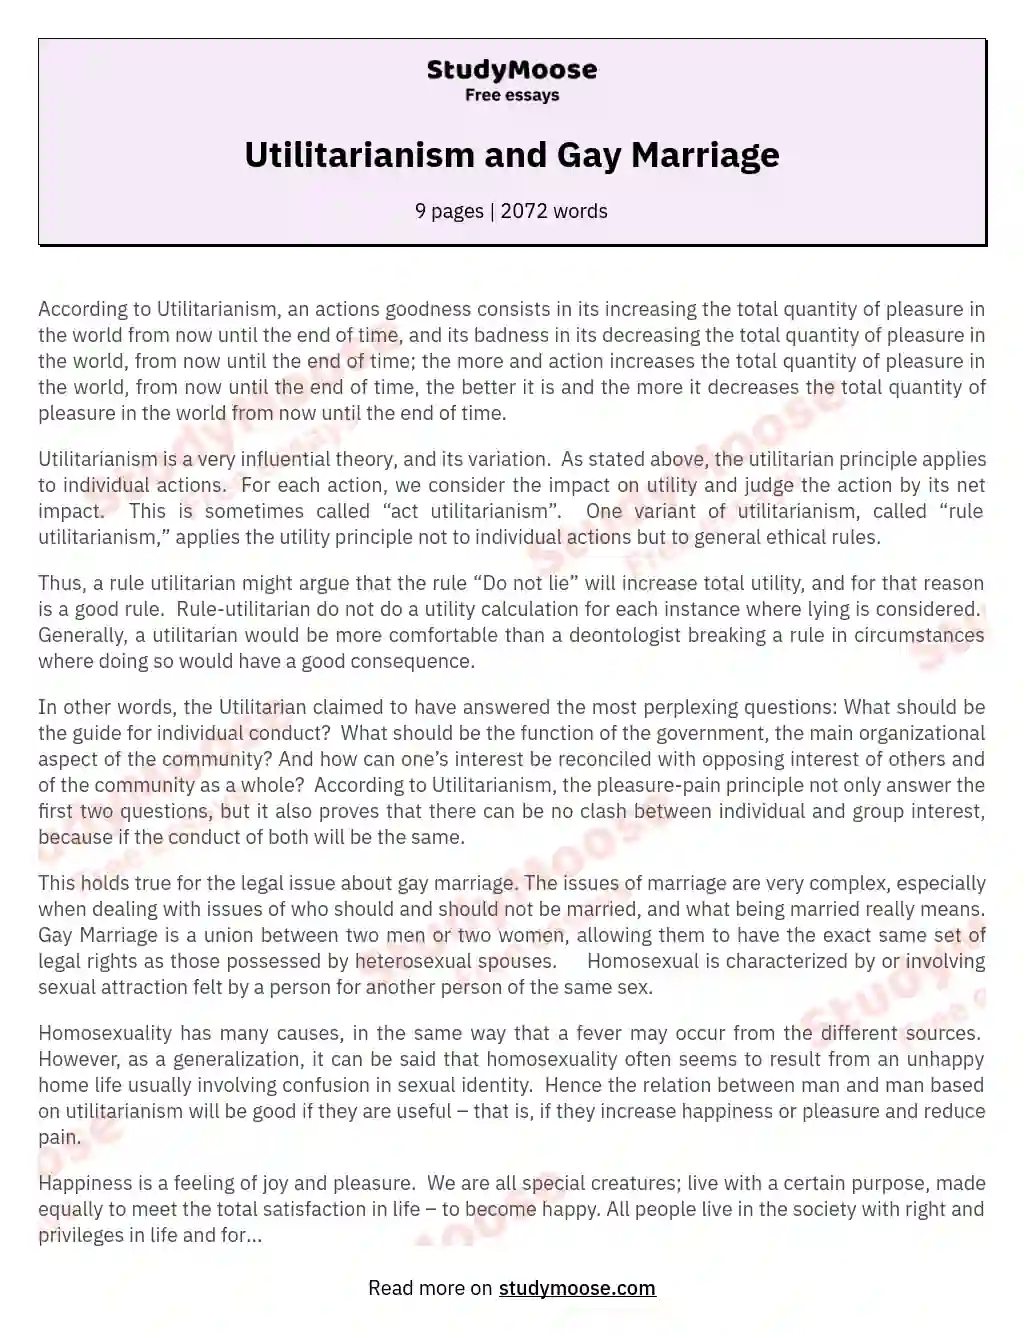 Utilitarianism and Gay Marriage essay